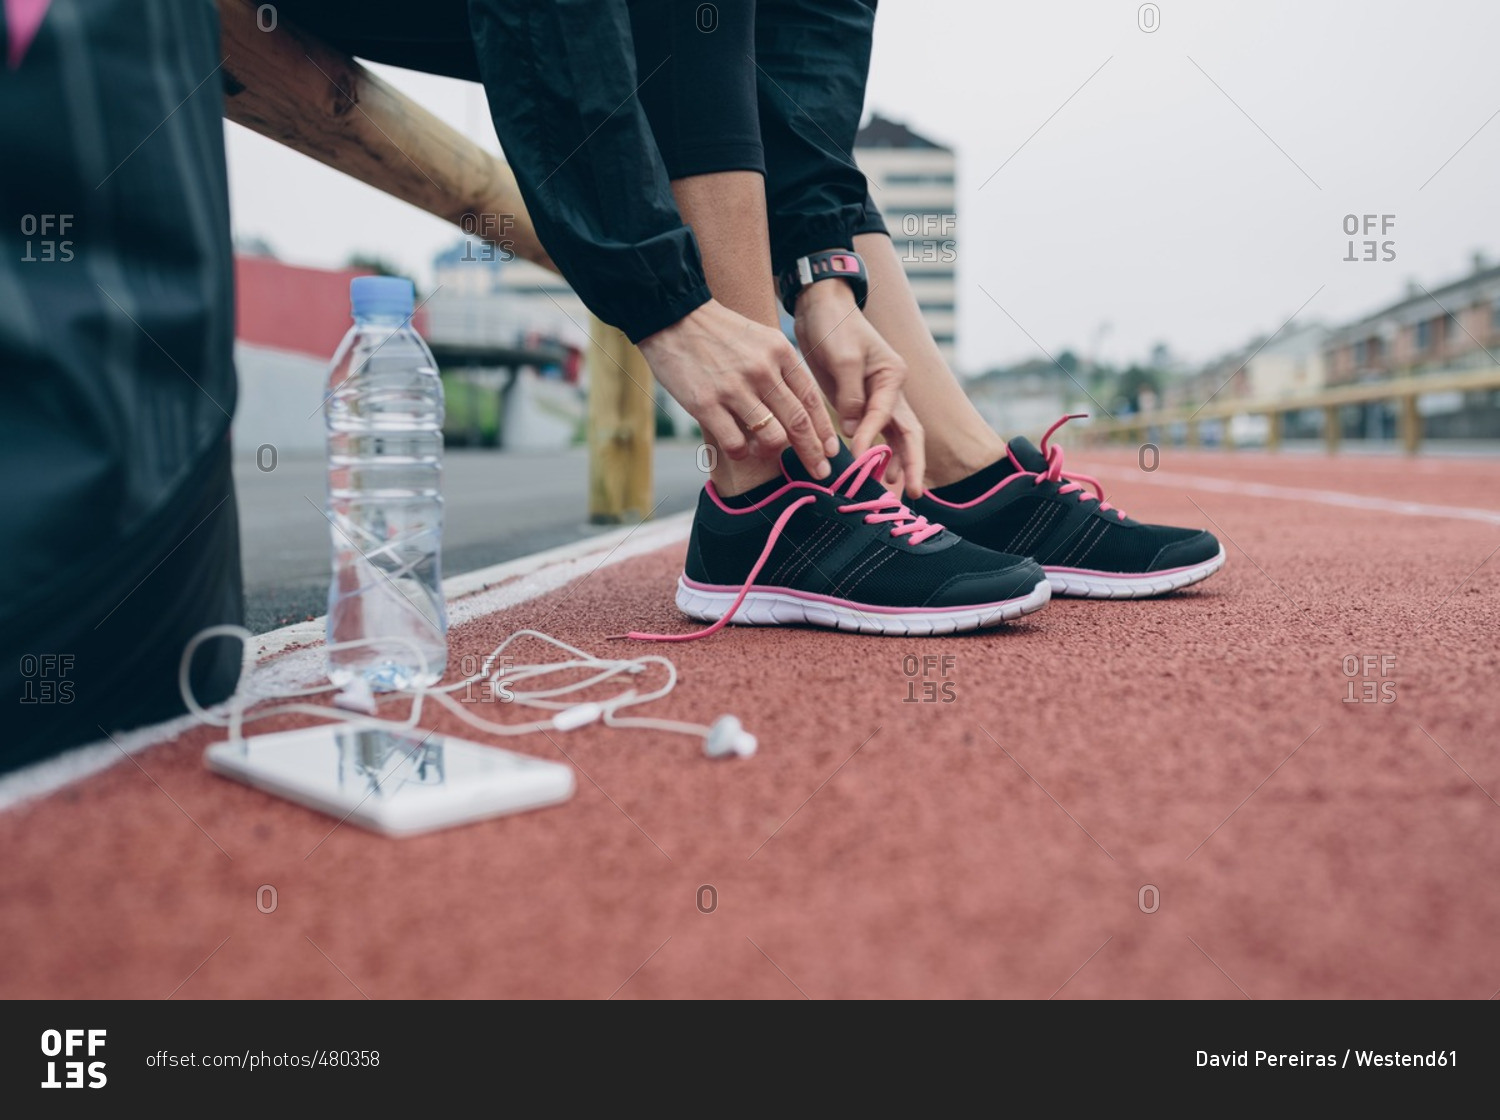 Woman on tartan track tying her shoes